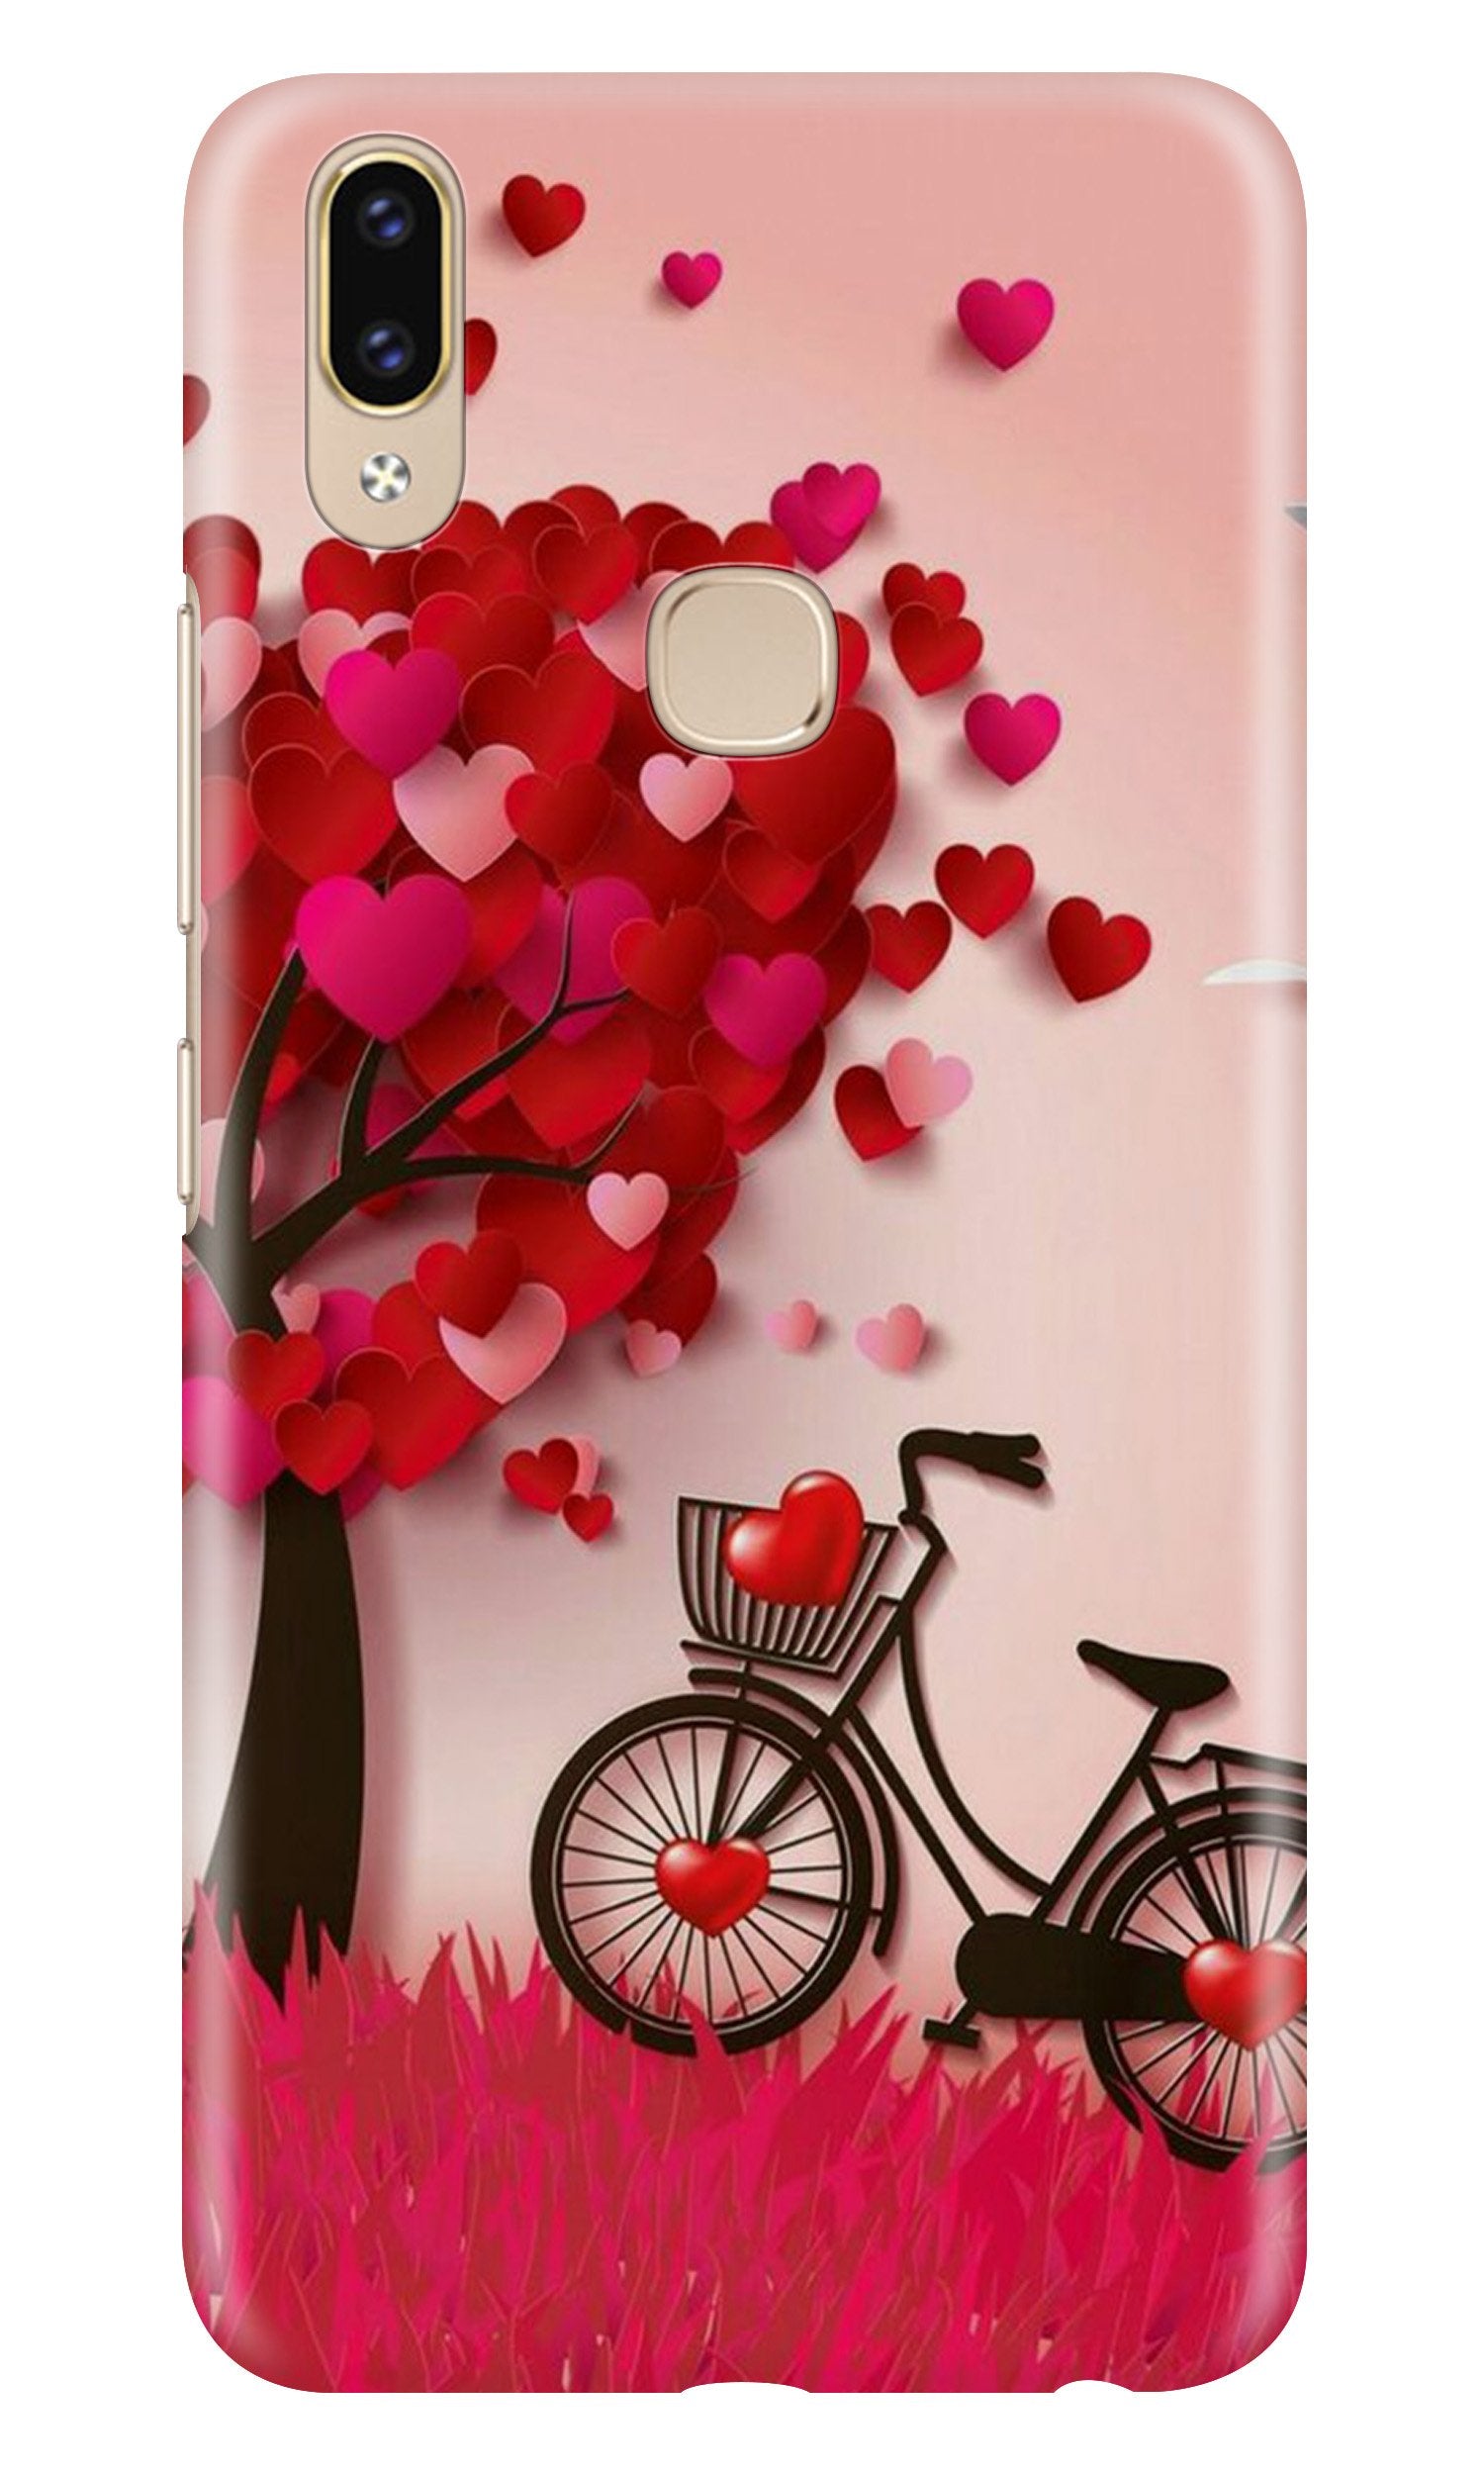 Red Heart Cycle Case for Zenfone 5z (Design No. 222)